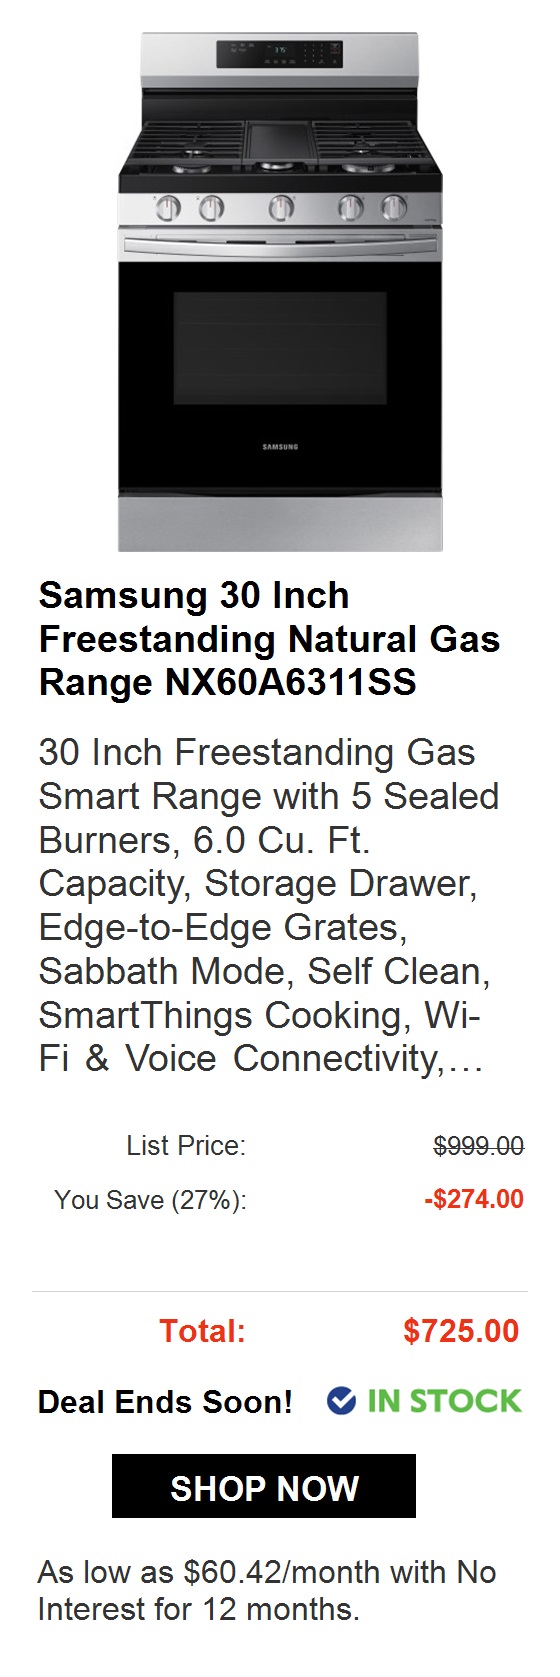  Samsung 30 Inch Freestanding Natural Gas Range NX60A6311SS 30 Inch Freestanding Gas Smart Range with 5 Sealed Burners, 6.0 Cu. Ft. Capacity, Storage Drawer, Edge-to-Edge Grates, Sabbath Mode, Self Clean, SmartThings Cooking, Wi- Fi Voice Connectivity,... List Price: St You Save 10%: -$99.90 Total: $899.10 @ IN STOCK As low as $74.93month with No Interest for 12 months. 